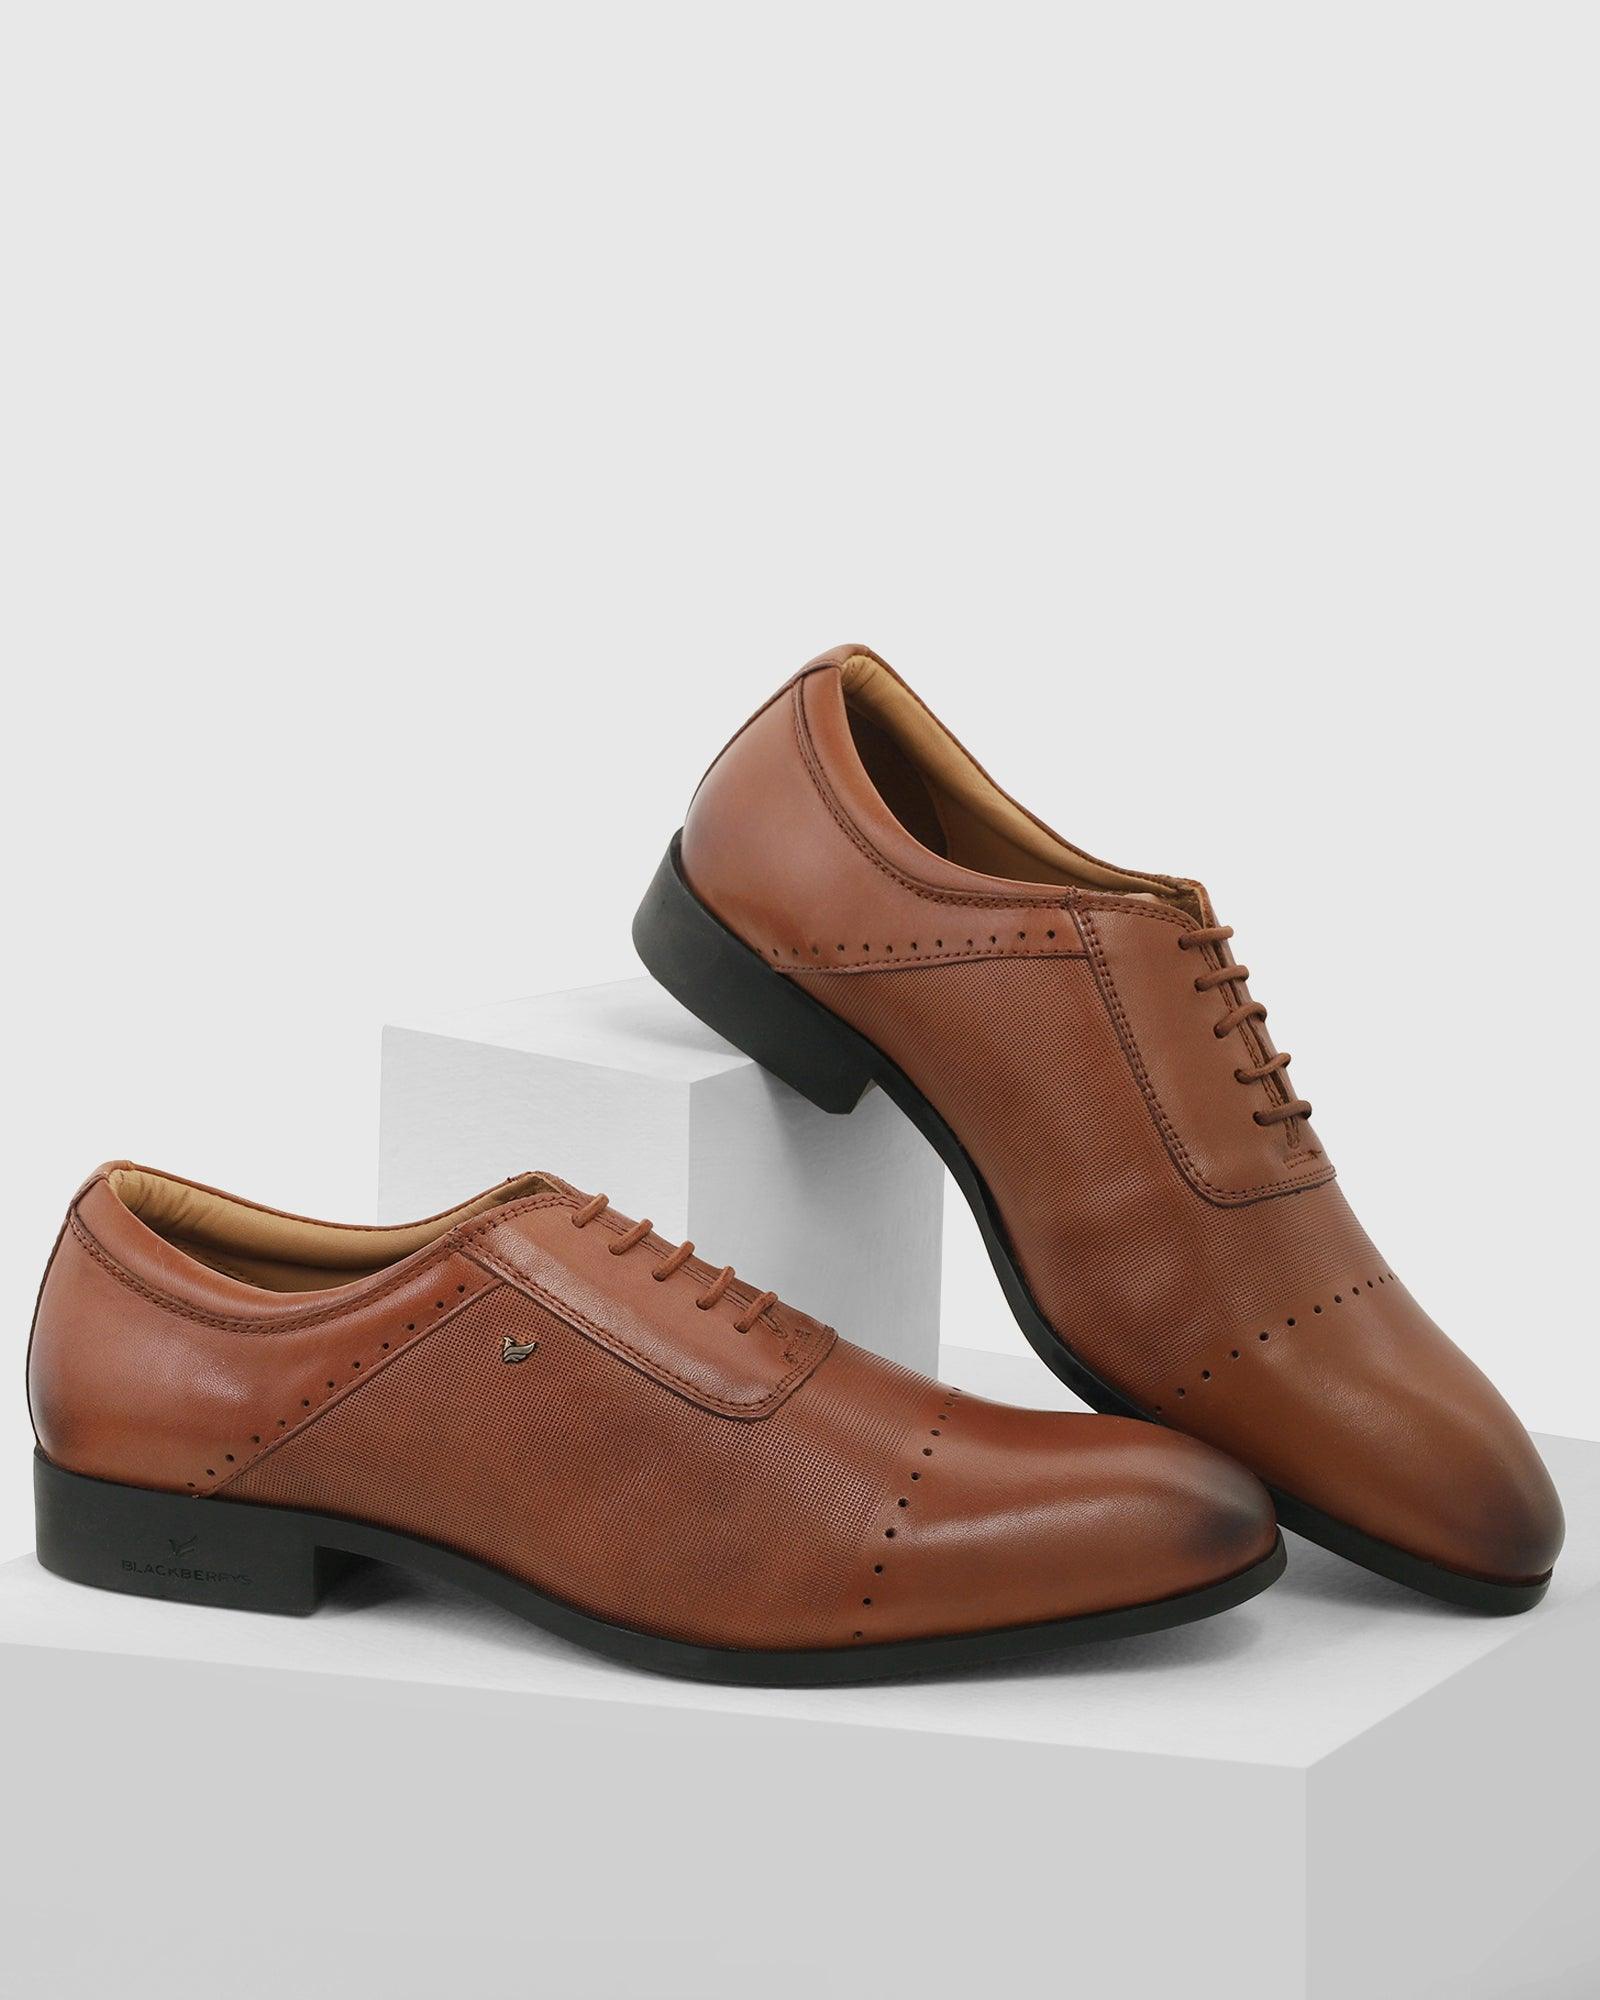 Must Haves Leather Tan Textured Oxford Shoes - Kiwi